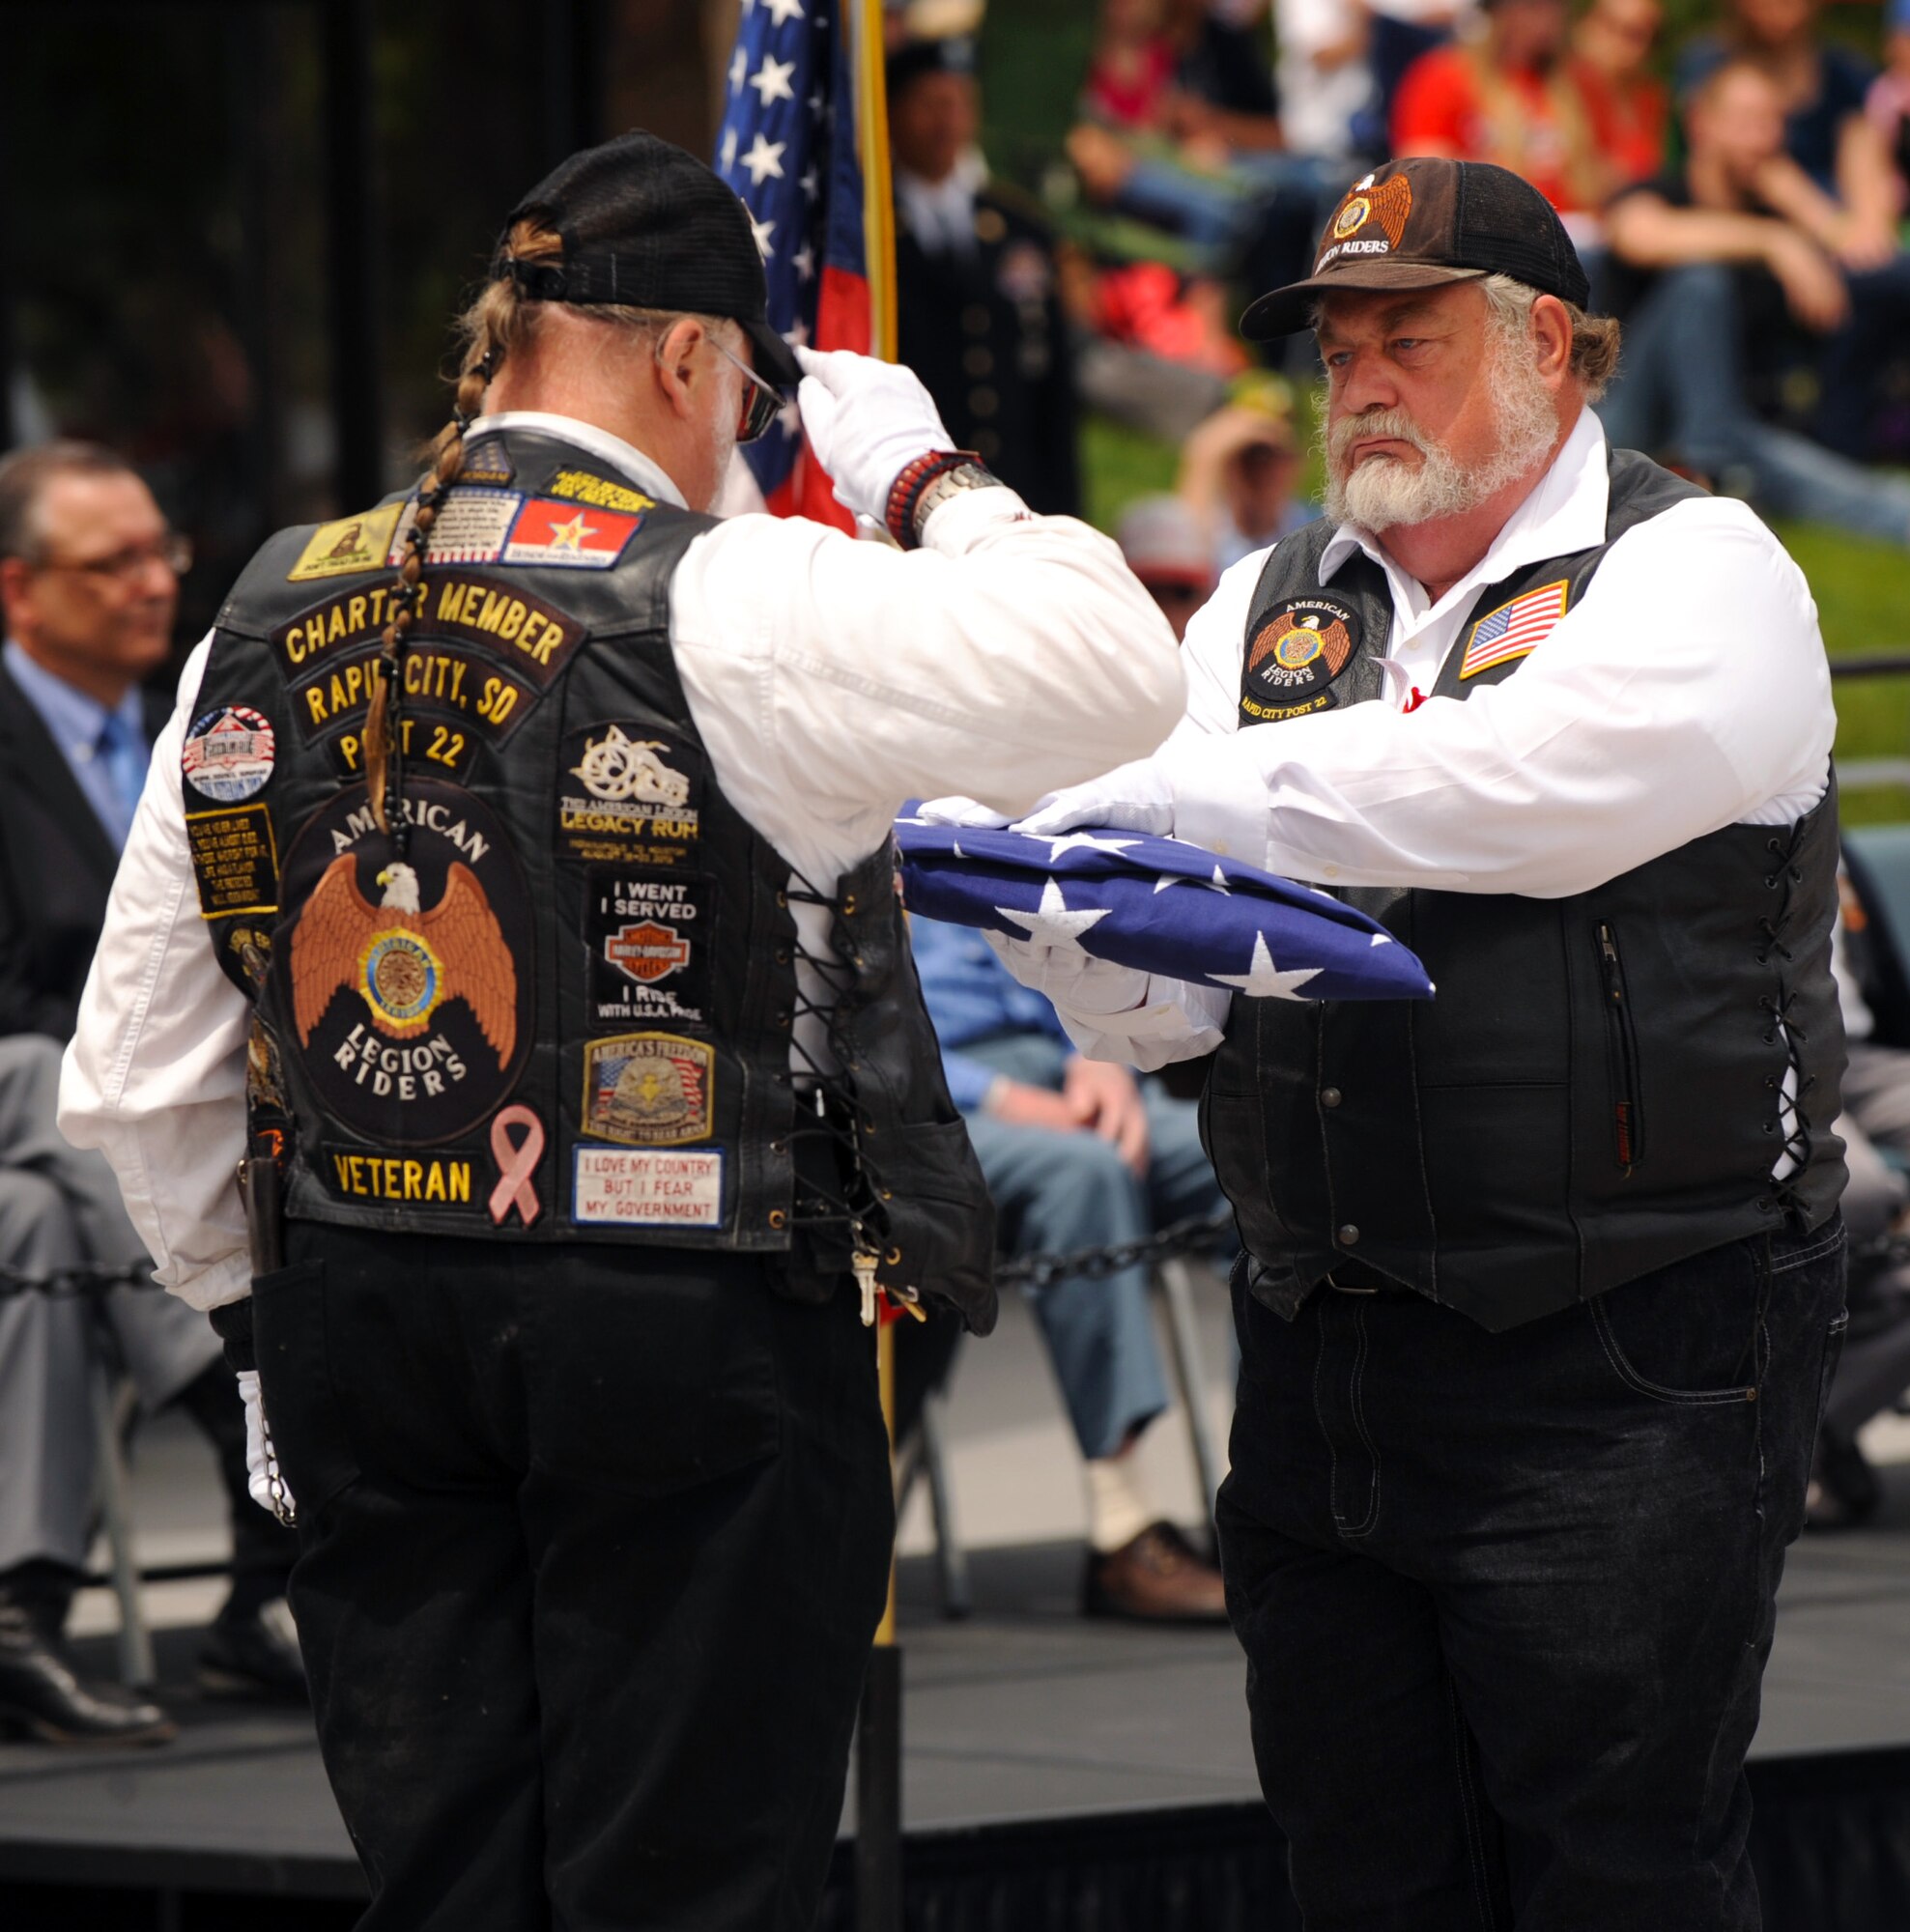 Members of the American Legion Riders Post #22 perform a passing of the flag during a Memorial Day ceremony at the Black Hills National Cemetery in Sturgis, S.D., May 30, 2016. For more than 200 years the American flag has been a symbol of freedom, inspiring Americans both at home and abroad. (U.S. Air Force photo by Airman 1st Class Denise M. Nevins/Released)